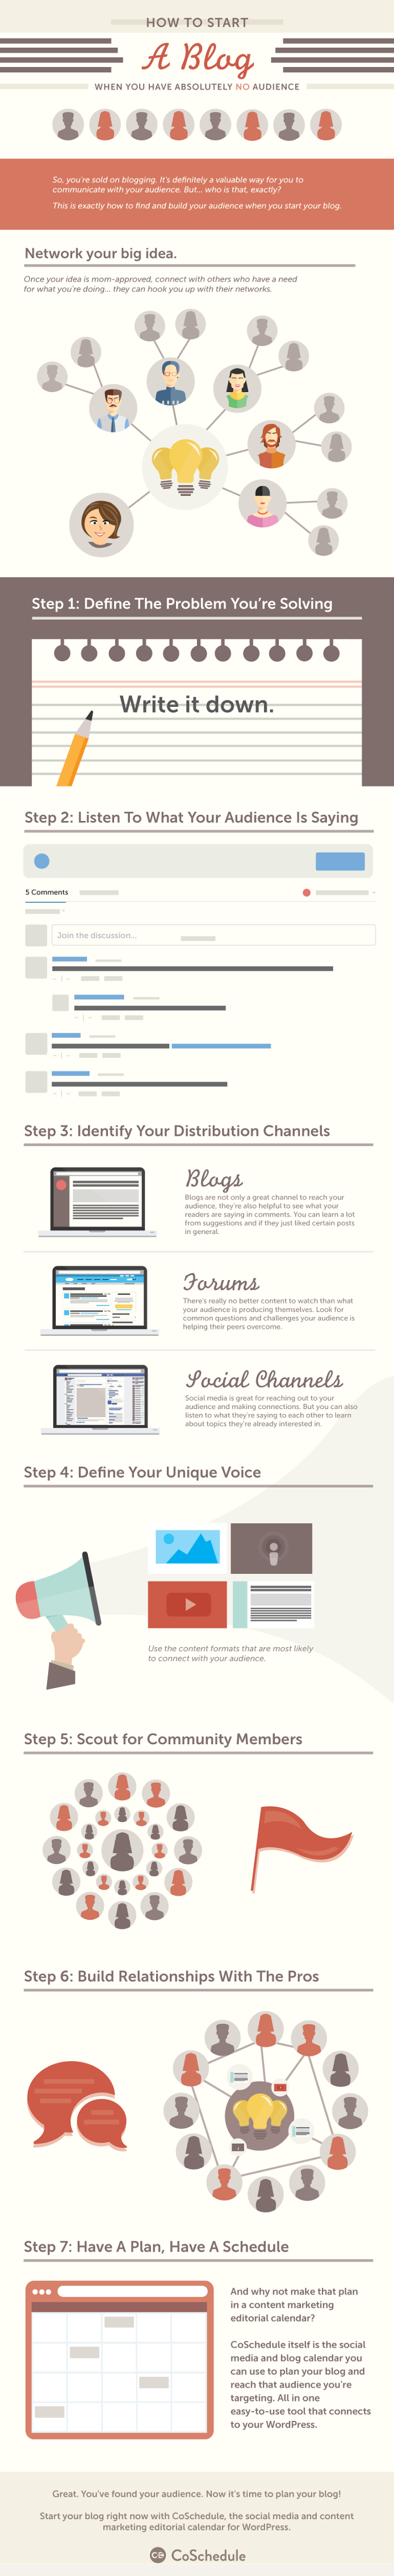 How To Start A Blog When You Have Absolutely No Audience - infographic